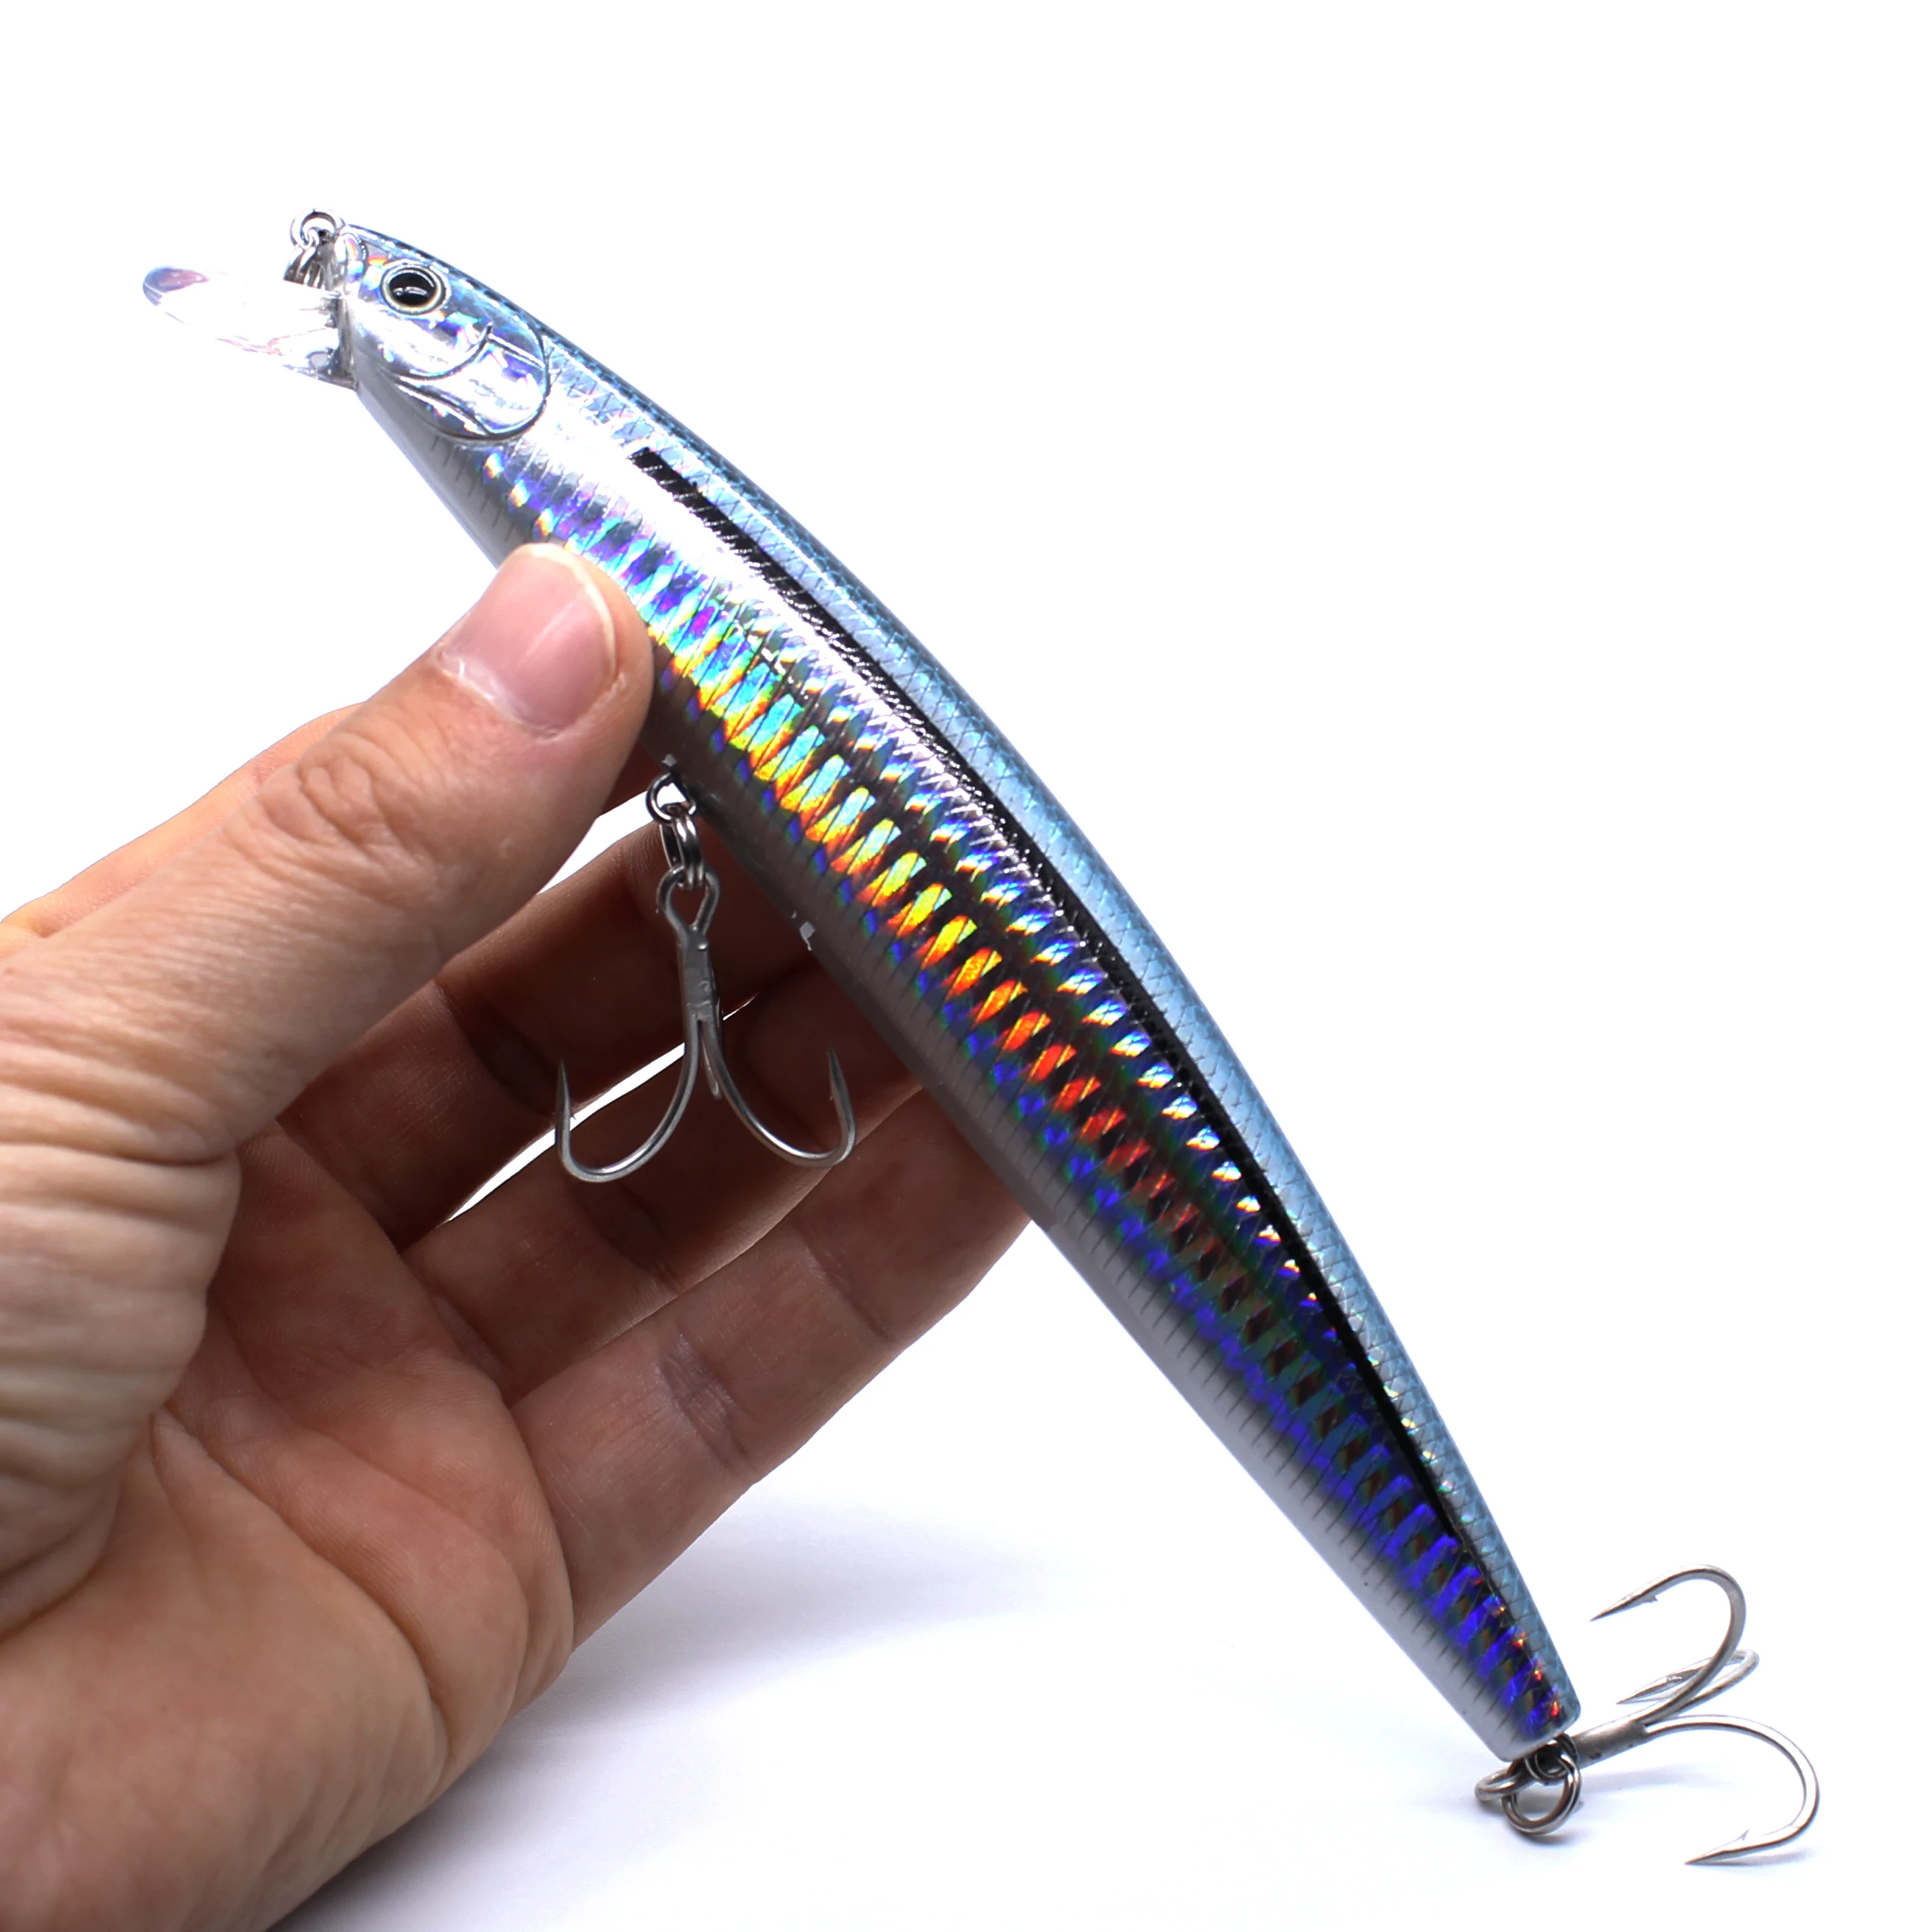 

AOCLU New 160mm 30g Floating Minnow Jerkbait Wobbler Hard Bait Popper Fishing Lure With Moving Balls For Seawater Fisihing, 4 colors